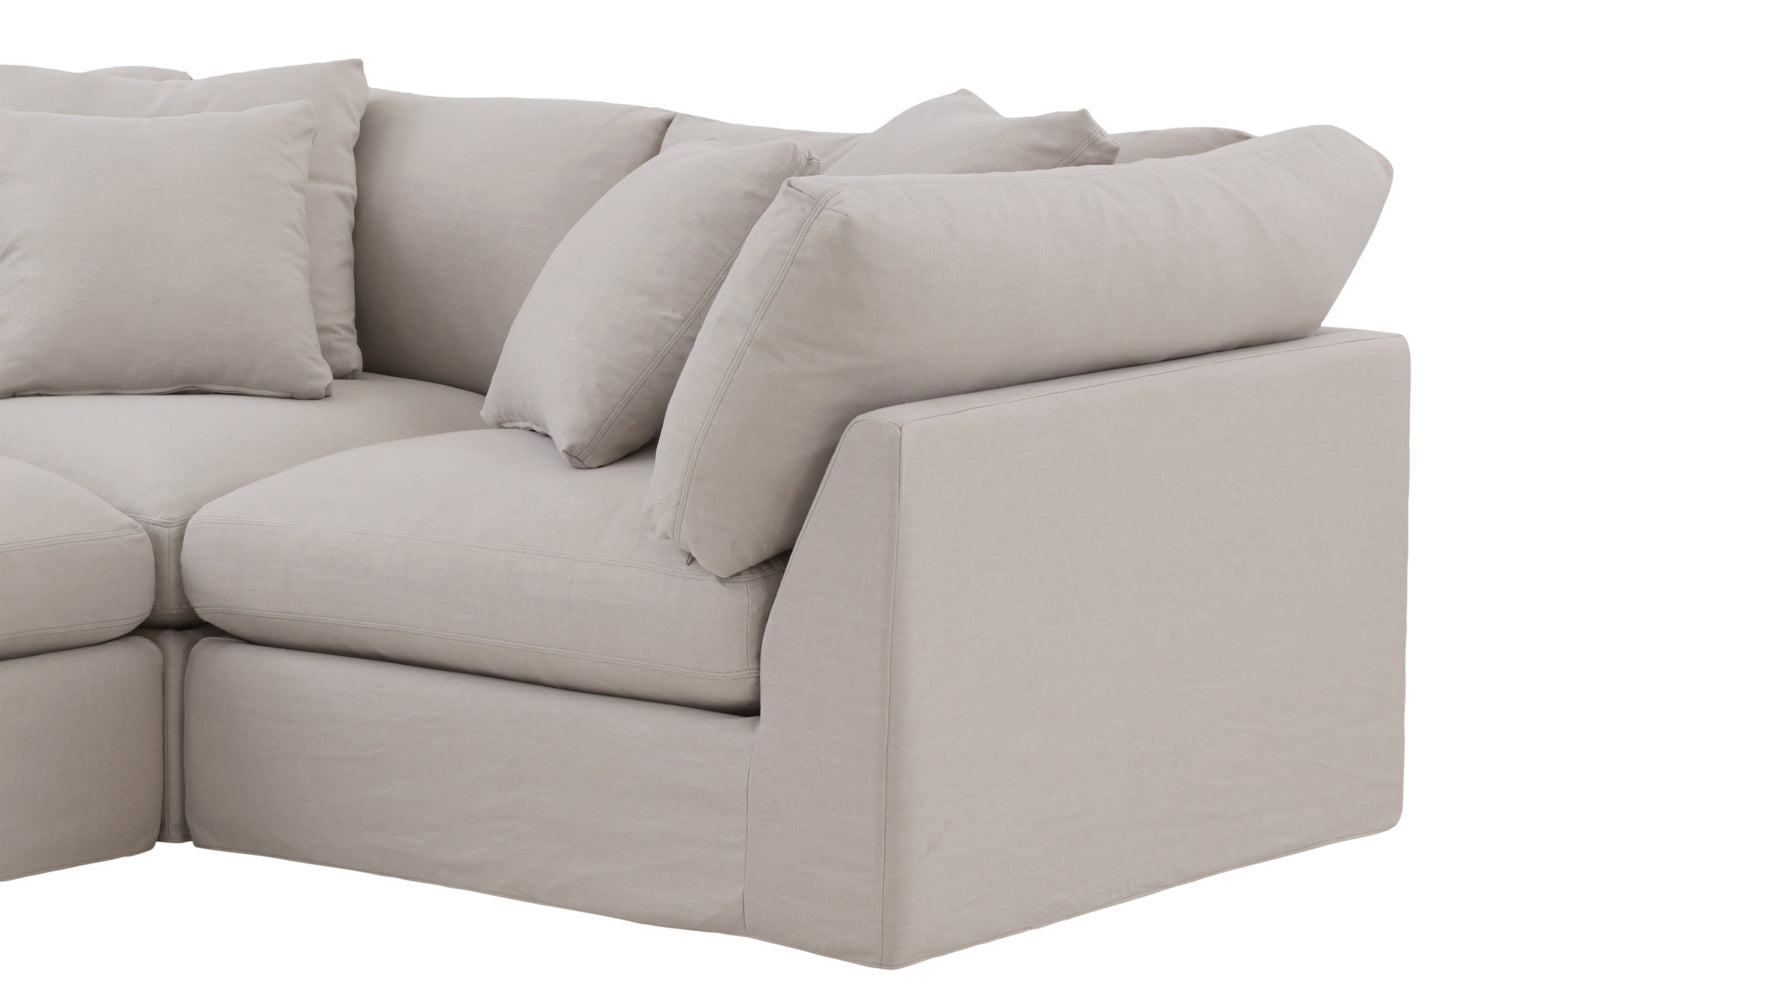 Get Together™ 4-Piece Modular Sectional Closed, Large, Clay - Image 11